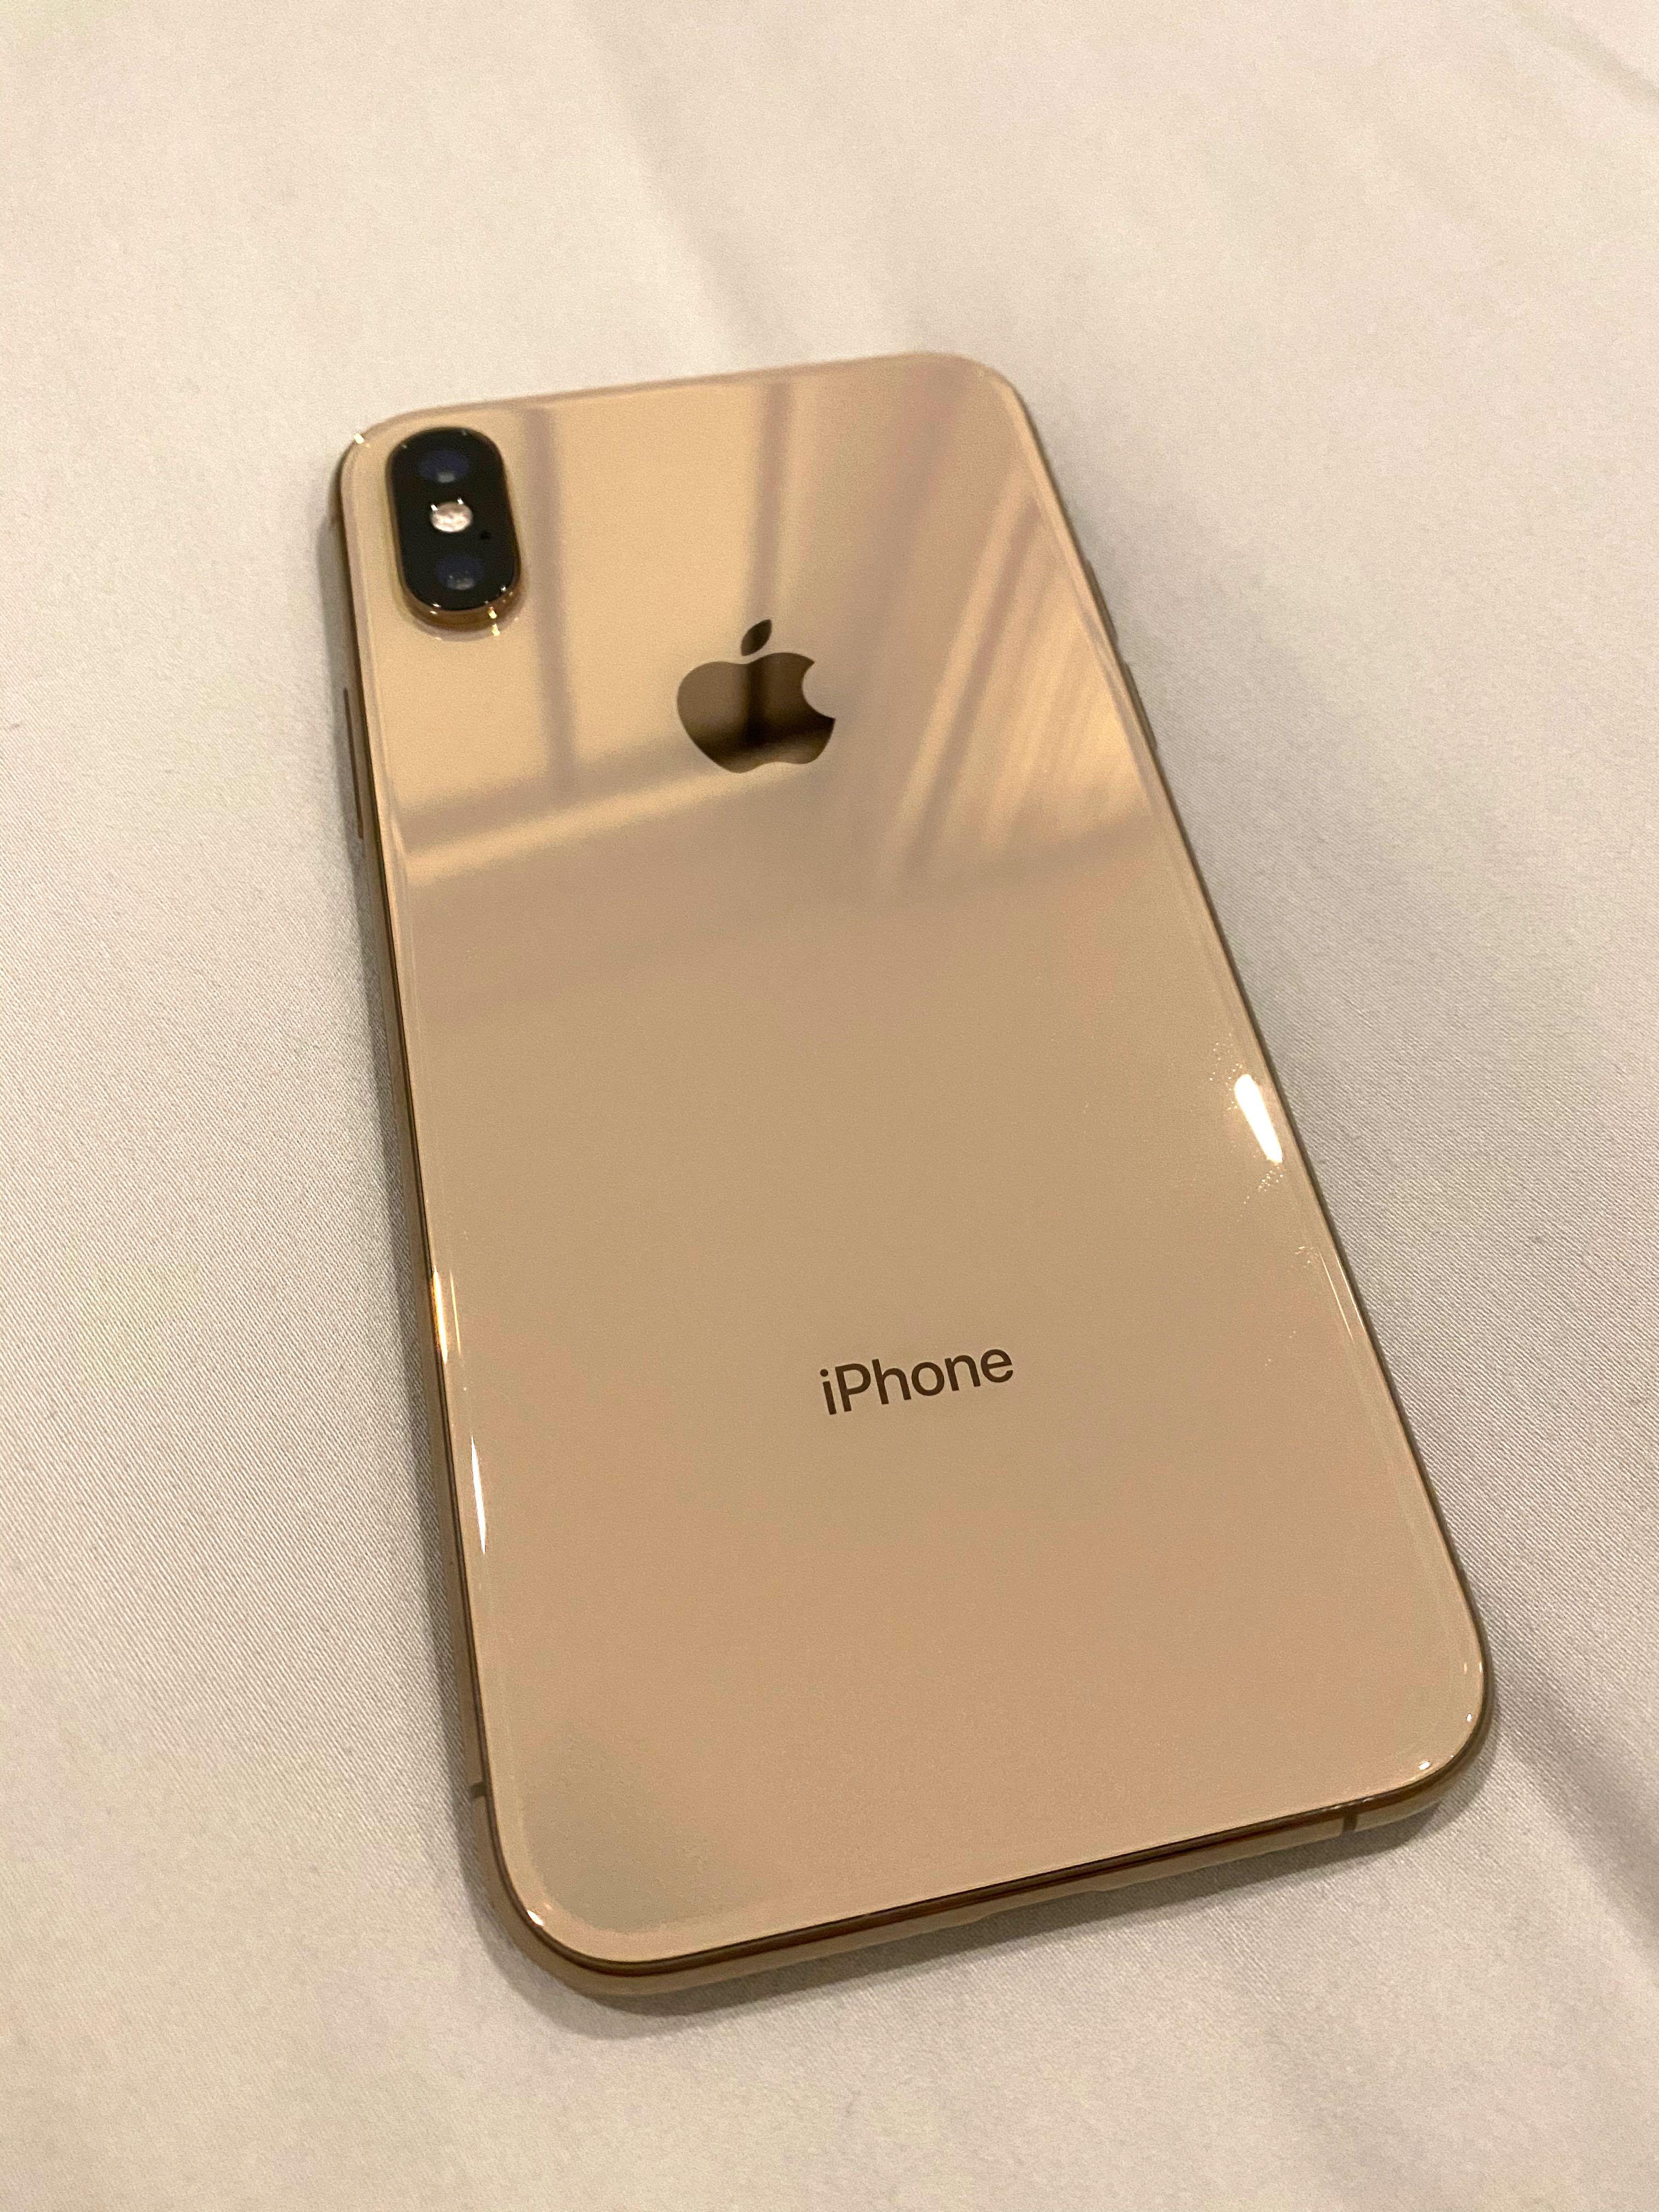 iPhone XS gold 256GB, Mobile Phones & Gadgets, Mobile Phones